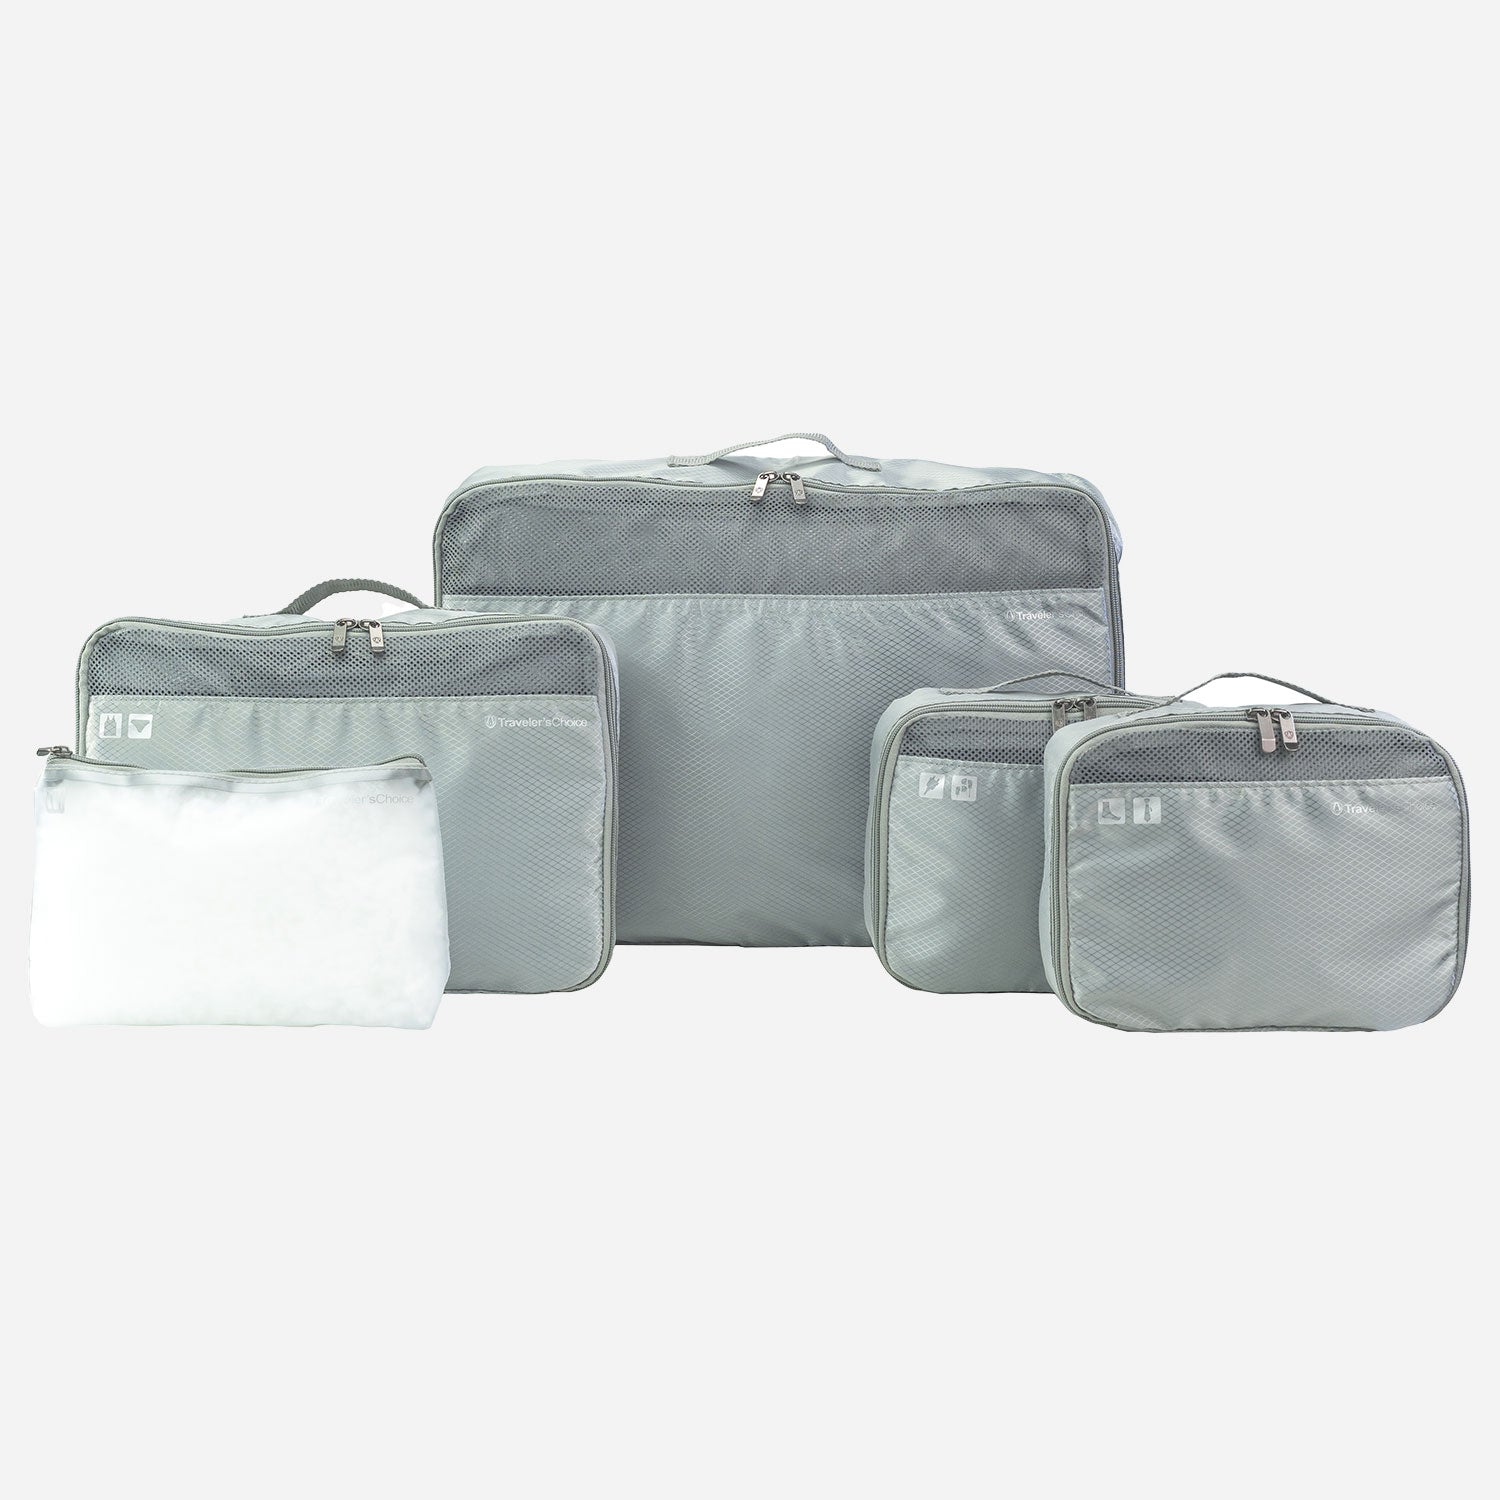  Packing Cubes Set of 4 Easter Eggs Farm Travel Bags